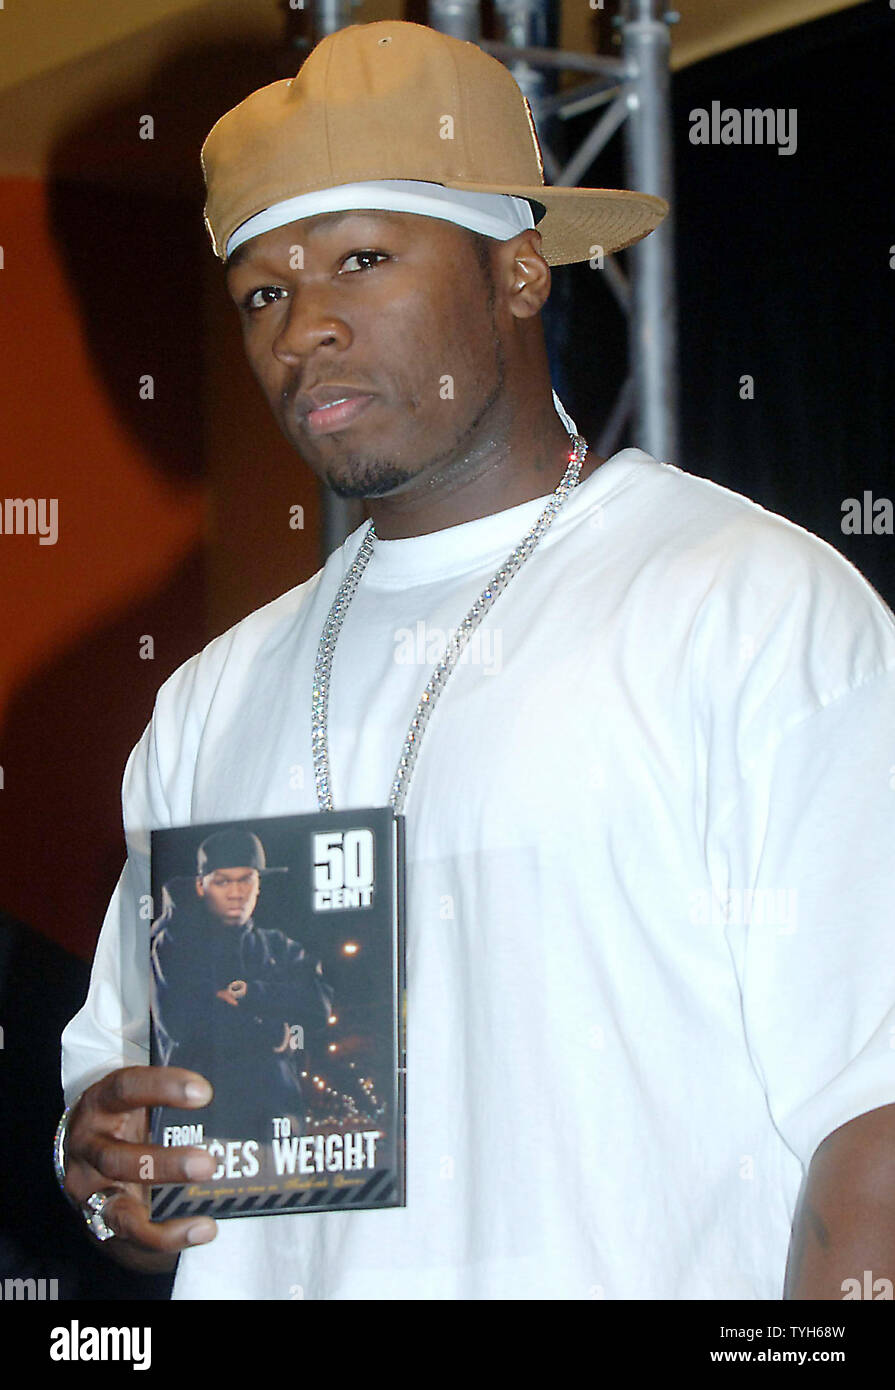 Rapper 50 Cent appears at New York's Virgin Megastore on August 9, 2005 to  promo his first autobiography: "From Pieces to Weight: Once upon a time in  Southside Queens" published by MTV